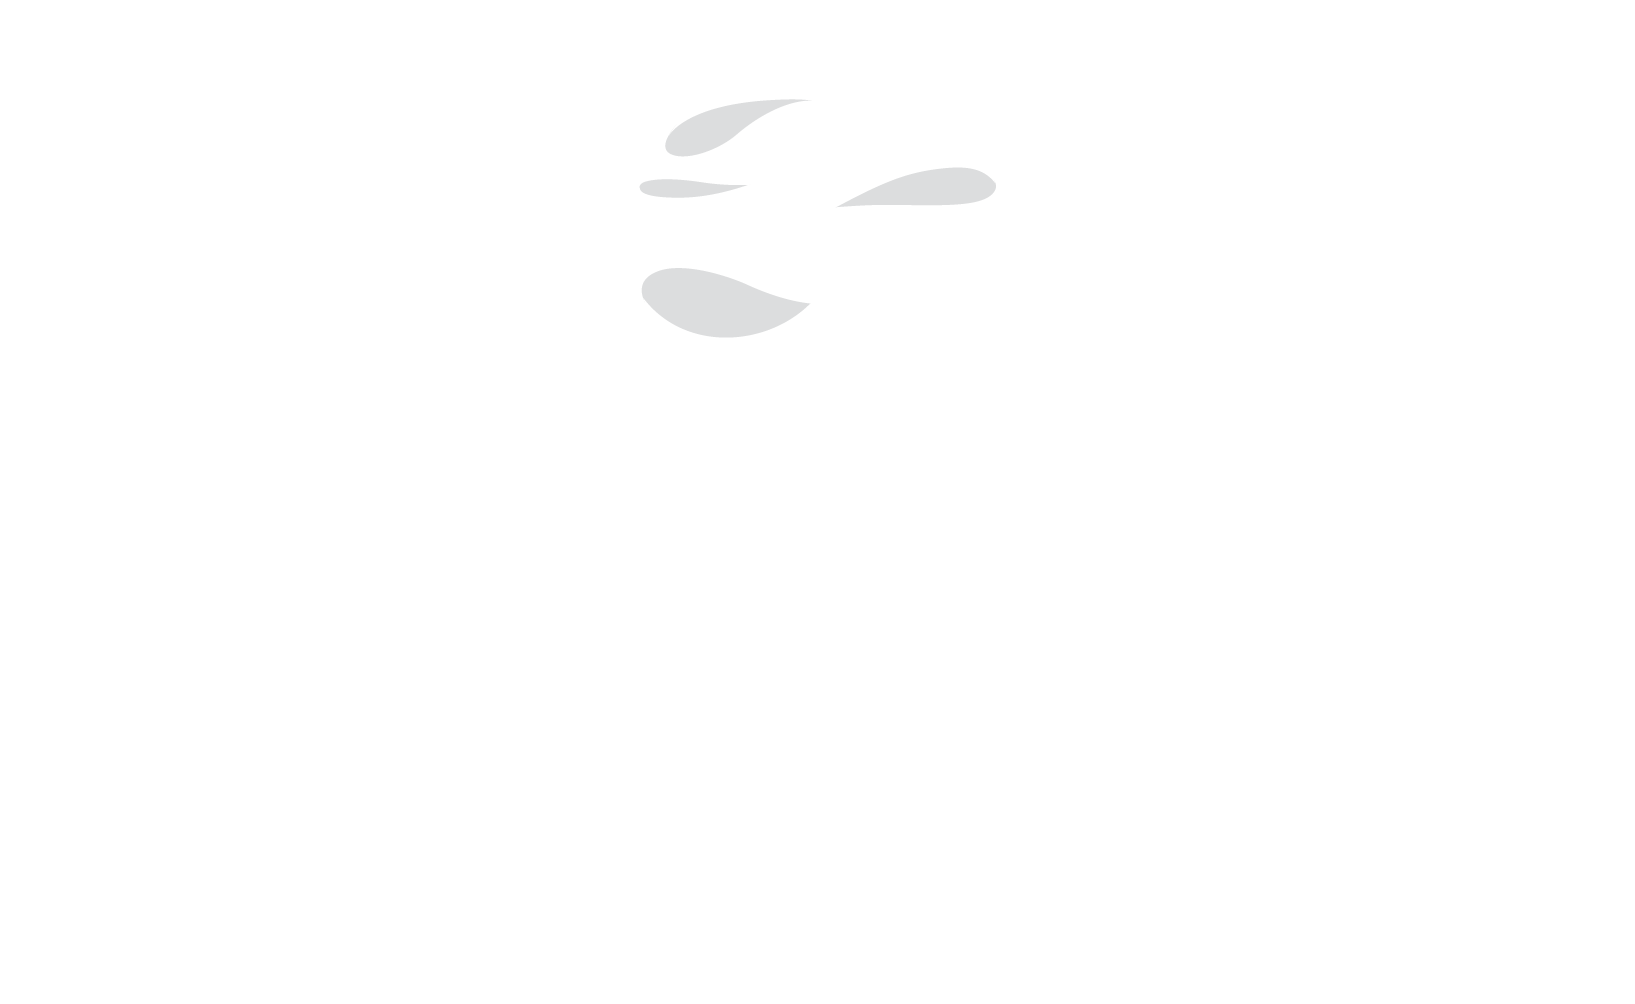 OfficeTechNow By JAVLN